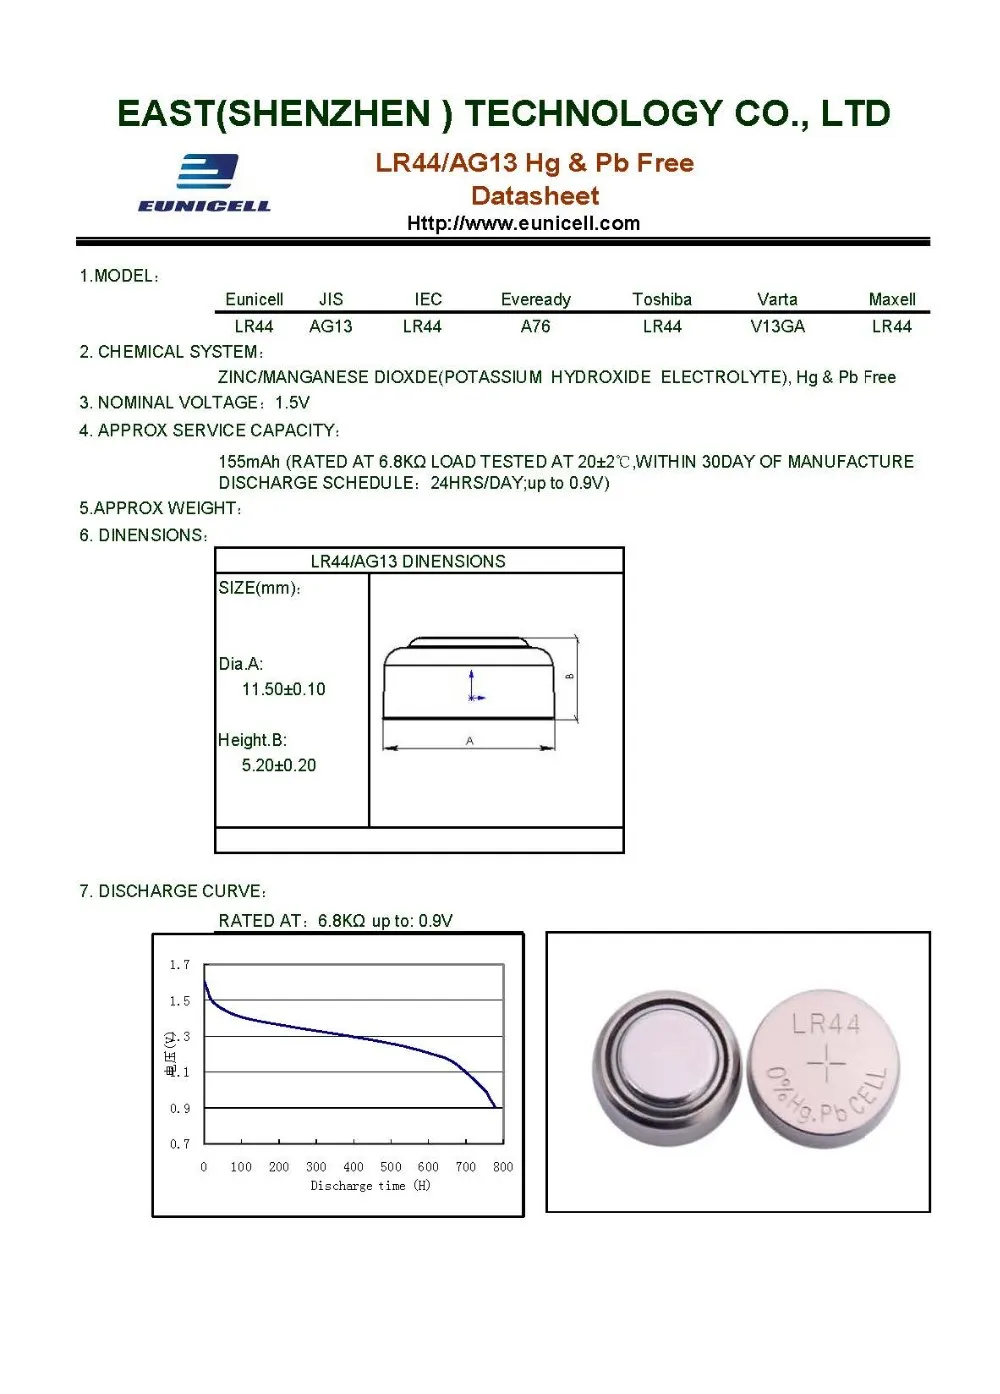 China Supplier Lr44 Button Cell 1 5v Alkaline Ag13 Lr44 Battery View Lr44 Button Cell Neutral Or Eunicell Or Oem Product Details From East Shenzhen Technology Co Ltd On Alibaba Com